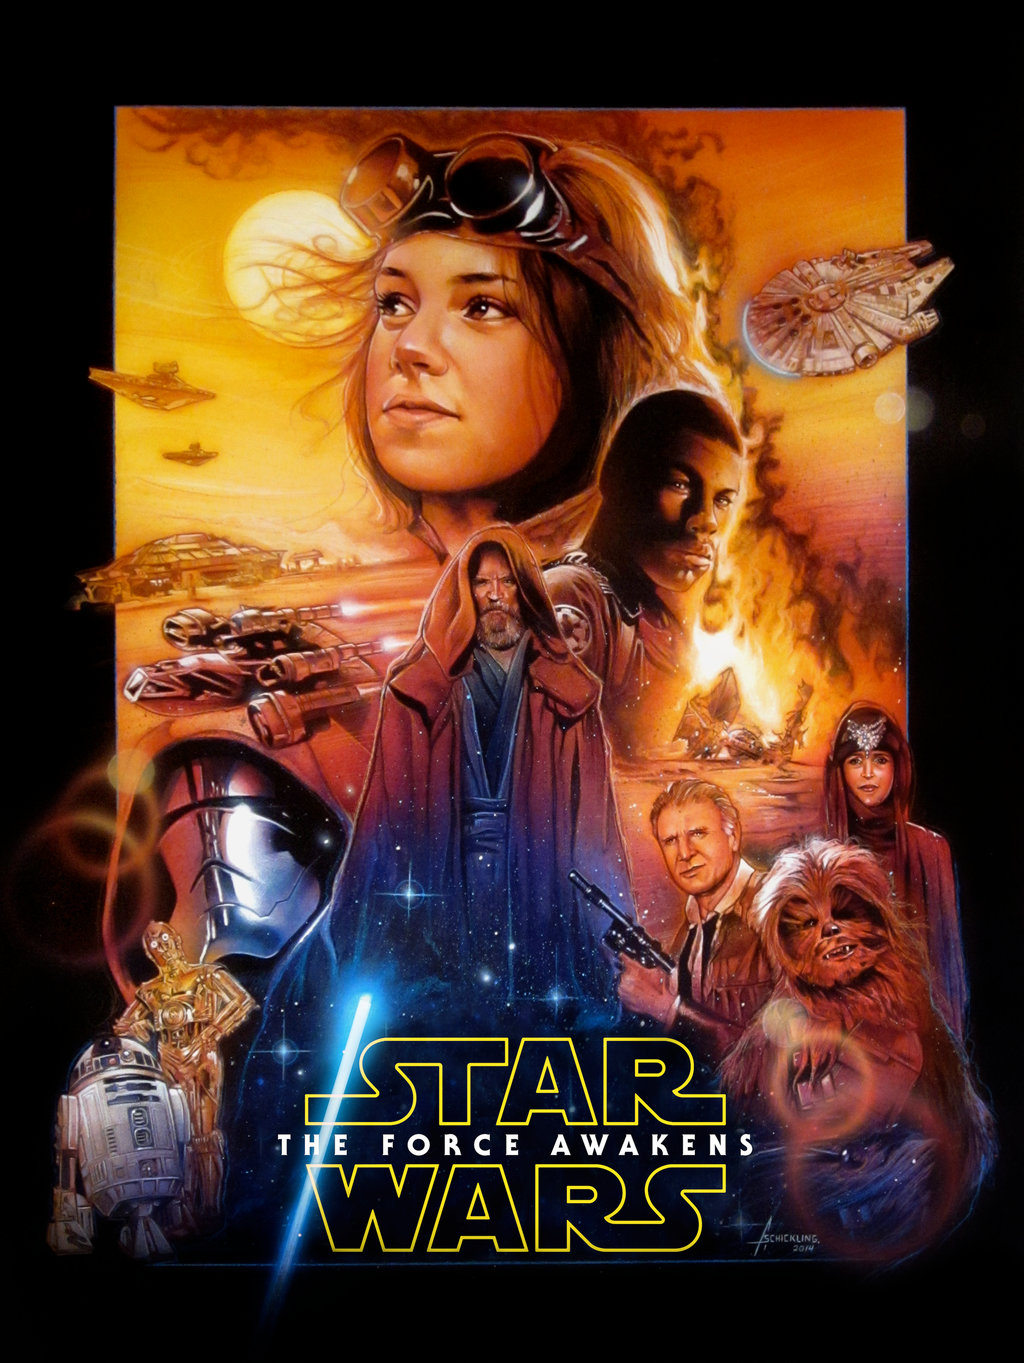 Star Wars The Force Awakens Poster by rampantimaginationA on 1024x1363